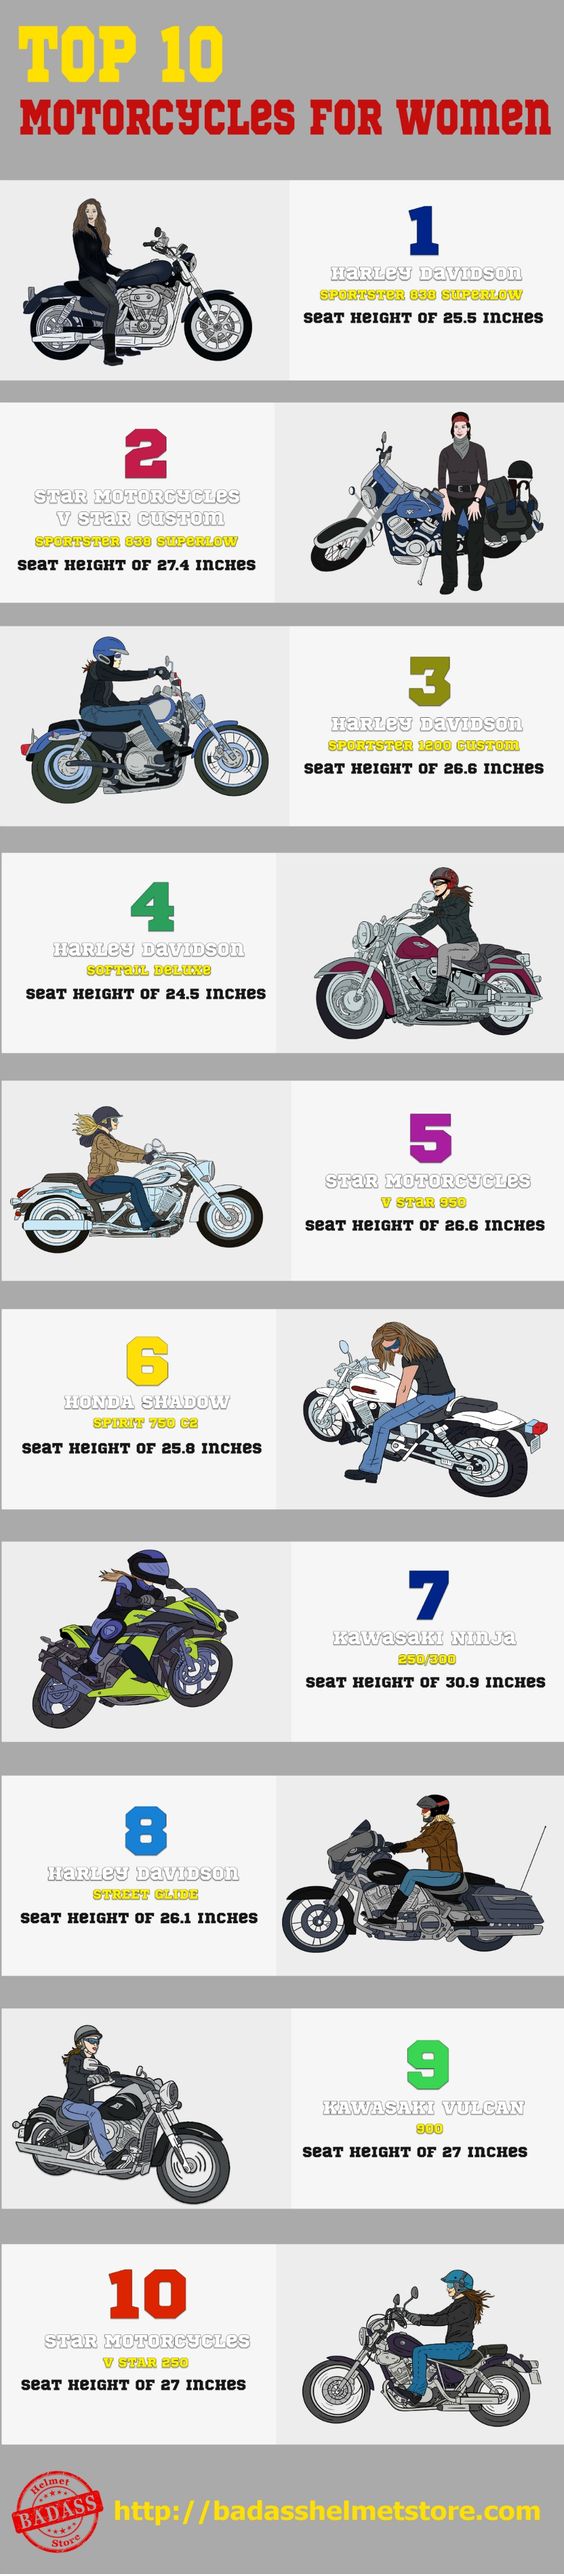 Best Motorcycles for Women - by the numbers